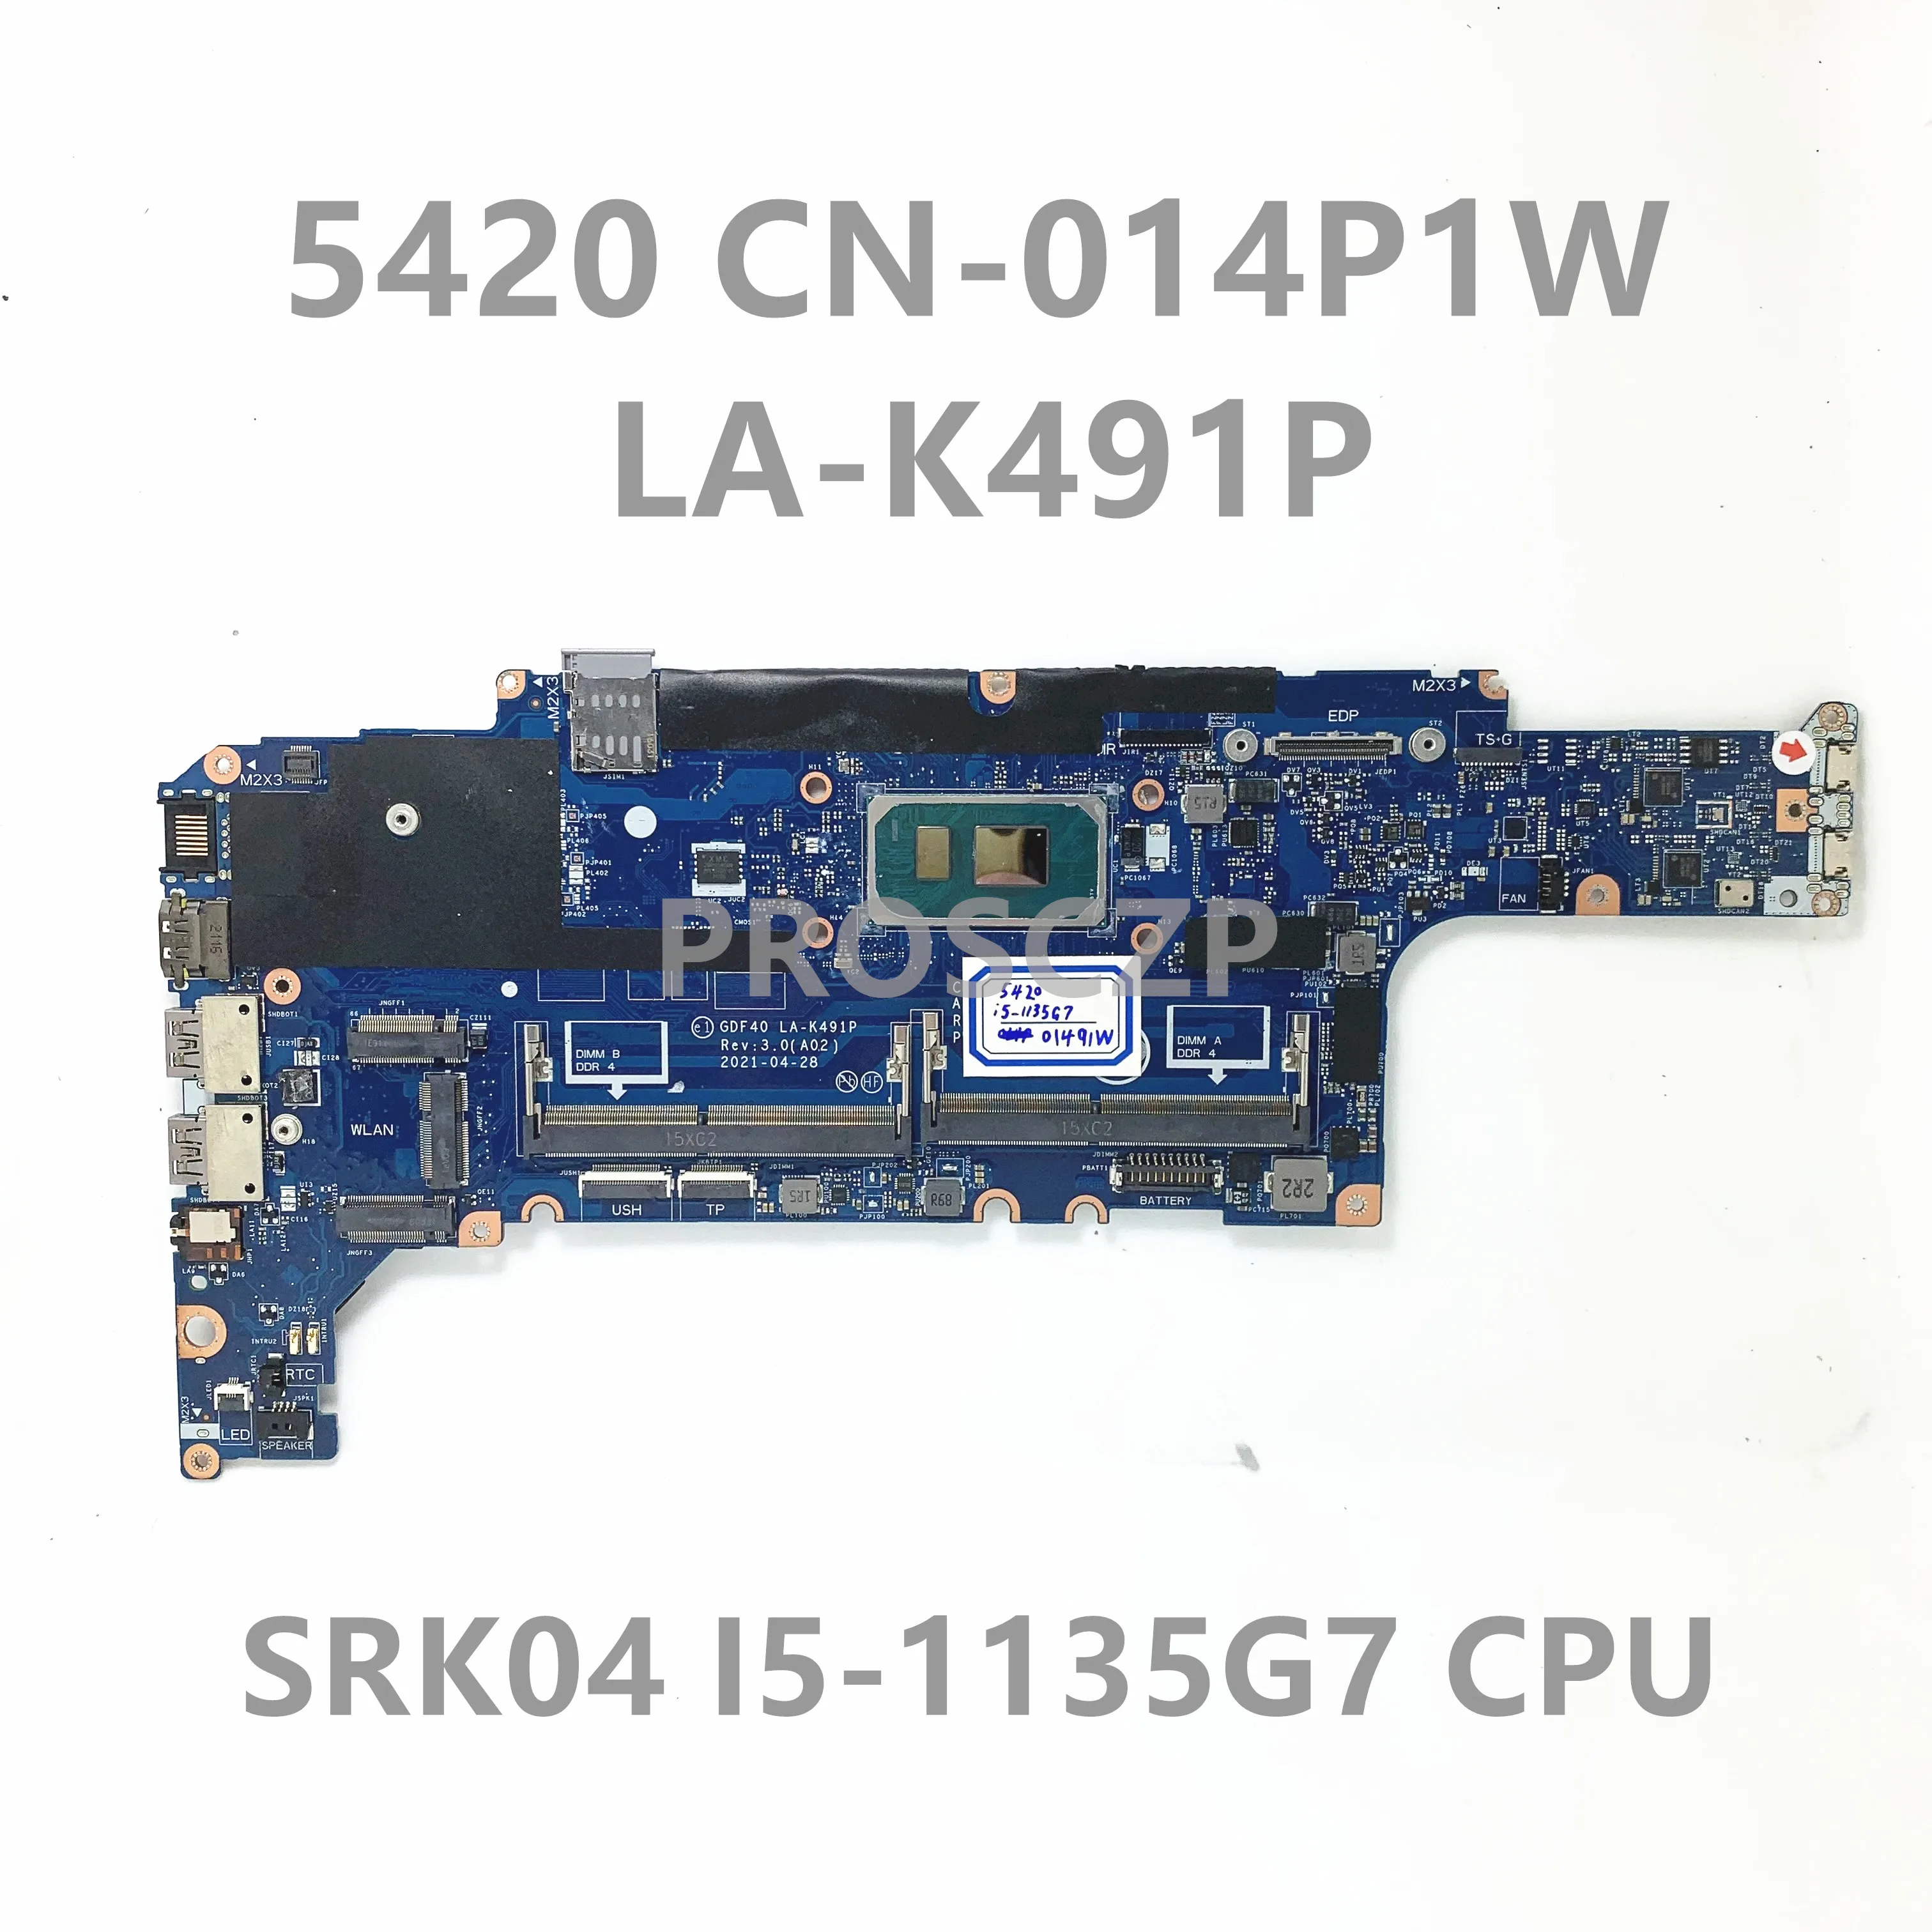 

CN-014P1W 014P1W 014P1W Mainboard For DELL 5420 Laptop Motherboard GDF40 LA-K491P With SRK04 I5-1135G7 CPU 100%Full Working Well